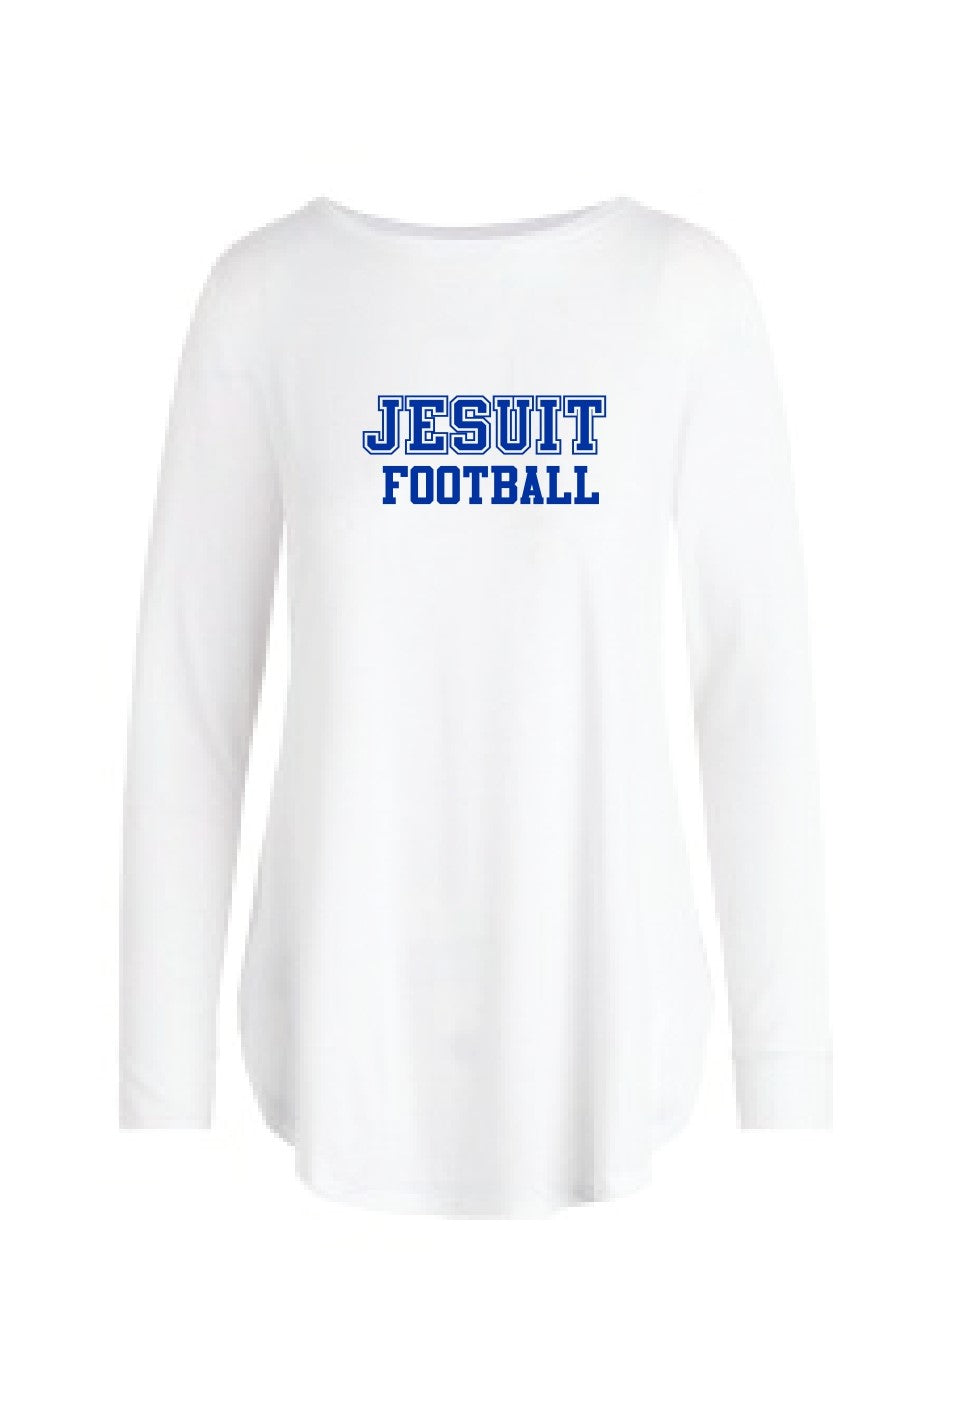 Tasc Performance.  48% Bamboo Viscose/47% Modal/5% Lycra.  Overlapping side scalloped panels with high side splits, sleeve cuffs, curved bottom hem, 28" body length.  With Jesuit Football logo.